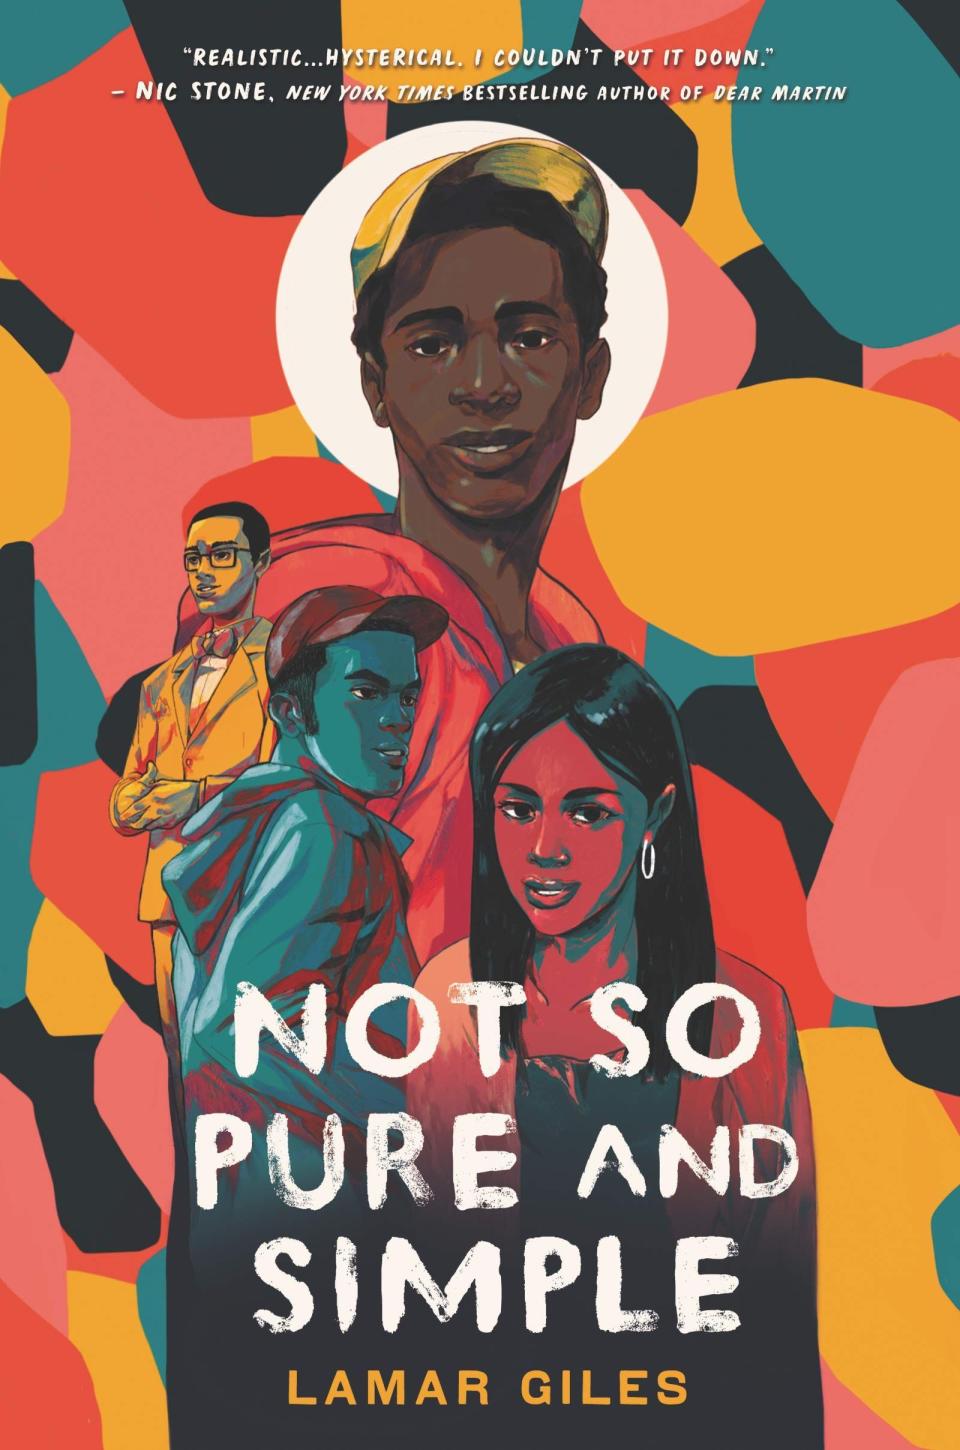 59) 'Not So Pure and Simple' by Lamar Giles